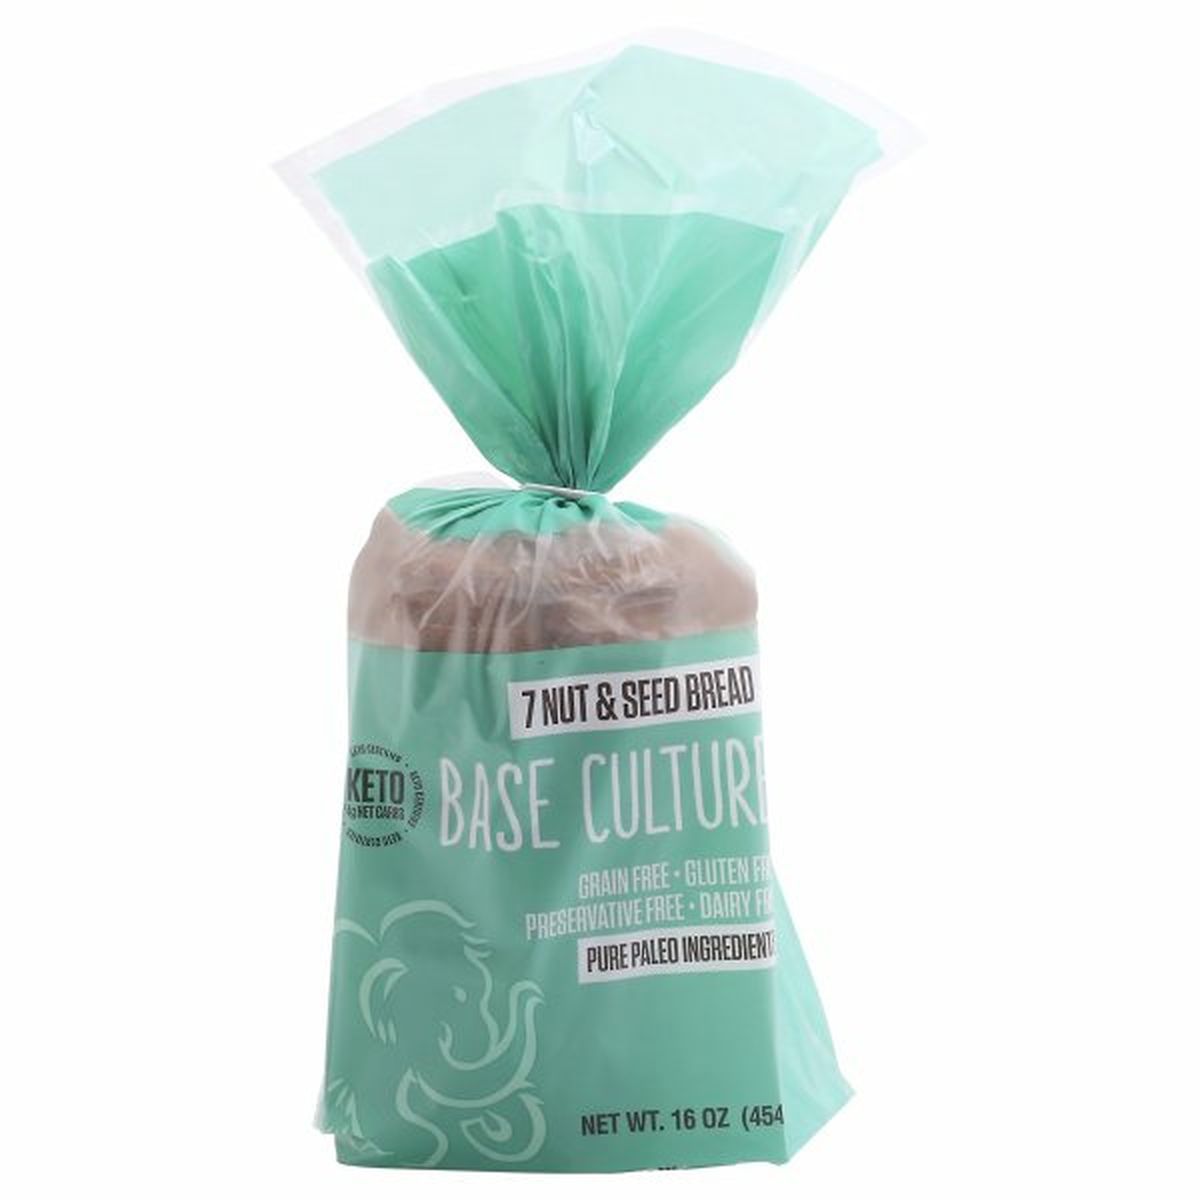 Calories in Base Culture Bread, 7 Nut & Seed